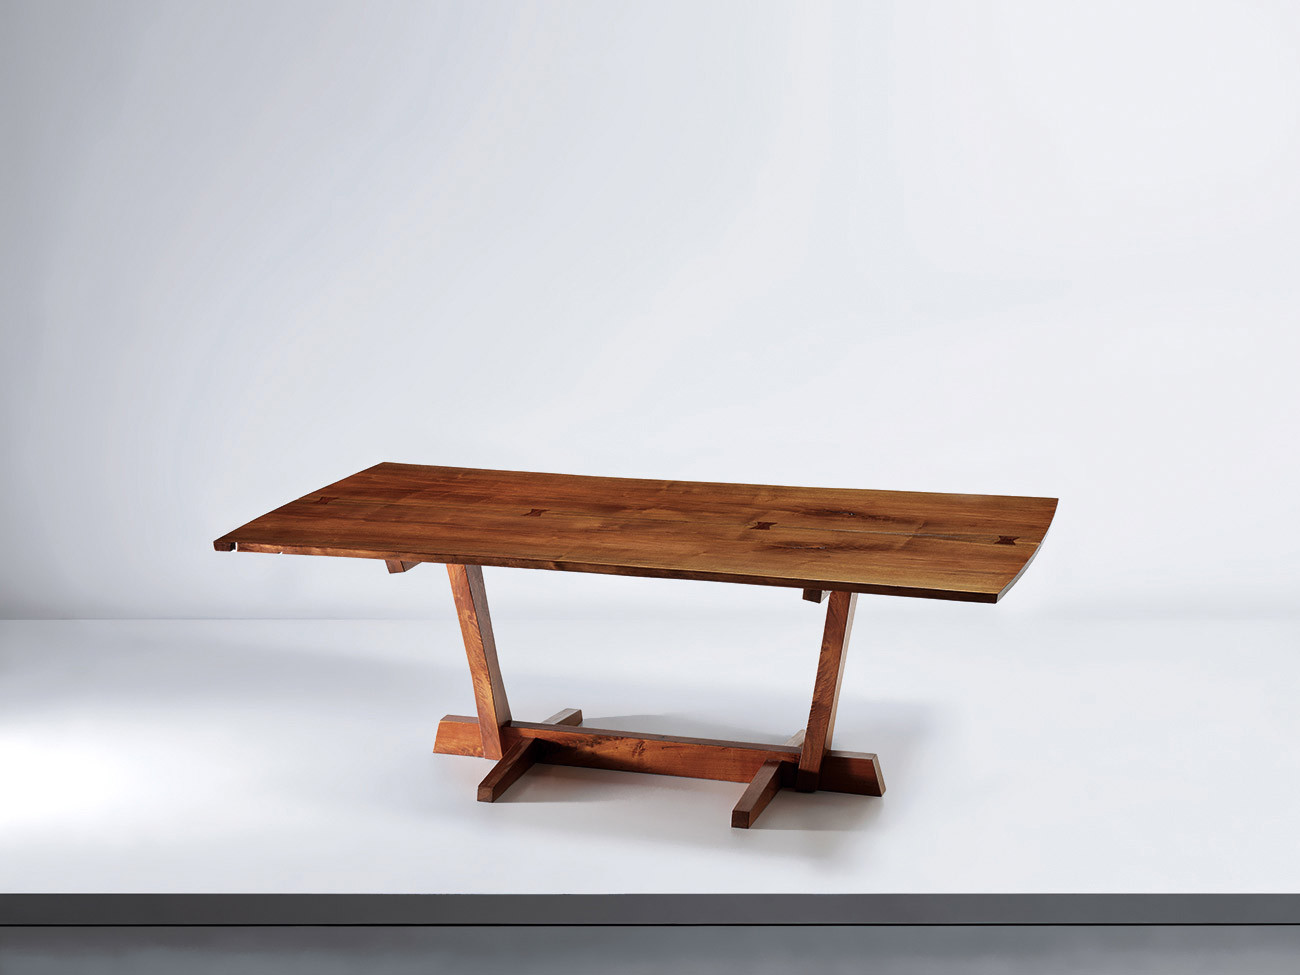 ‘Conoid’ dining table